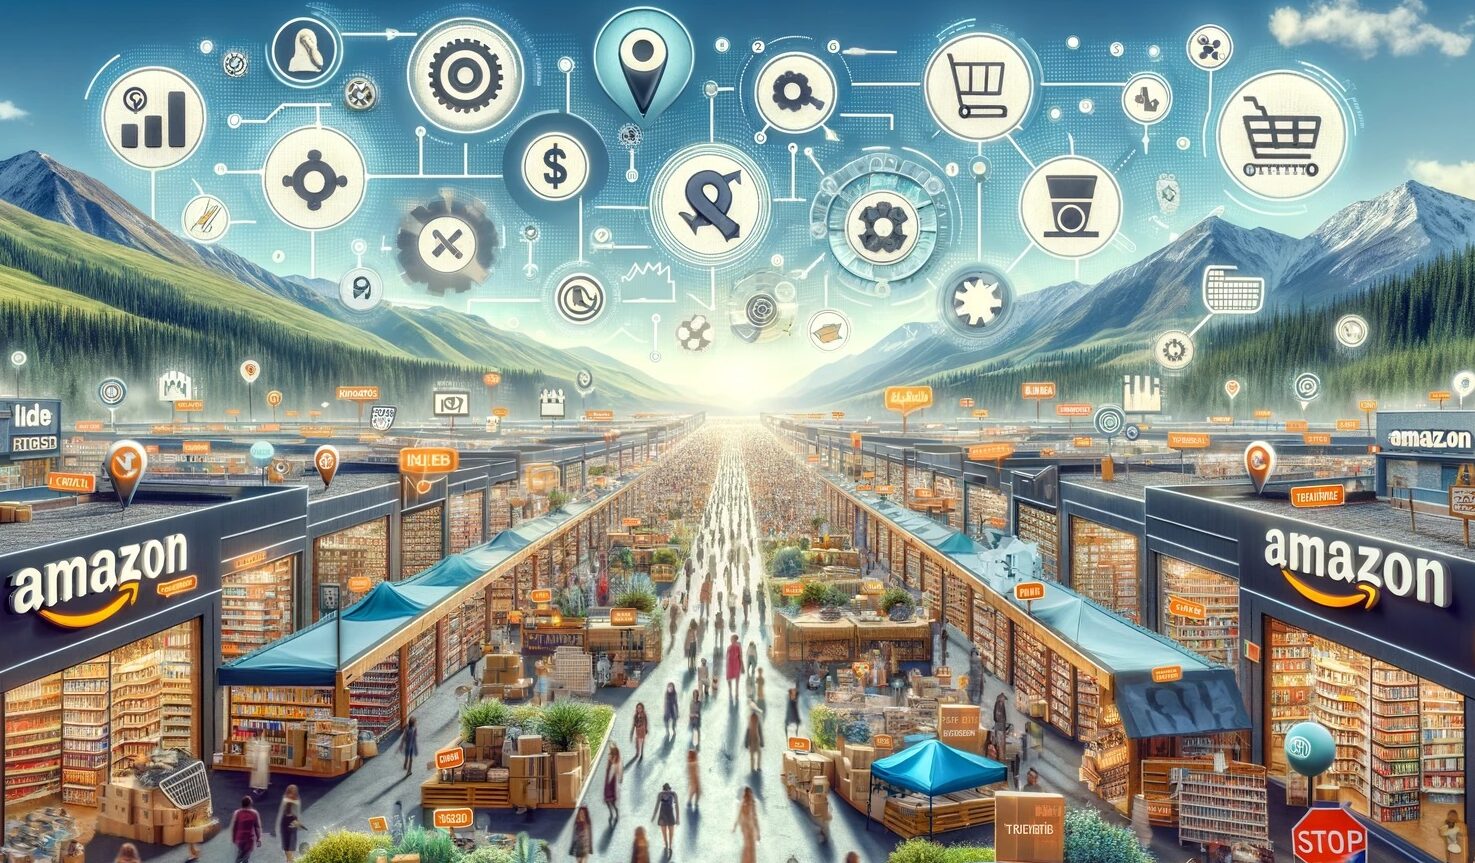 A fantastical infographic of a large vibrant main street with businesses on either side of the street with a large number of people walking down the street. In the foreground on either side are two large Amazon branded buildings.